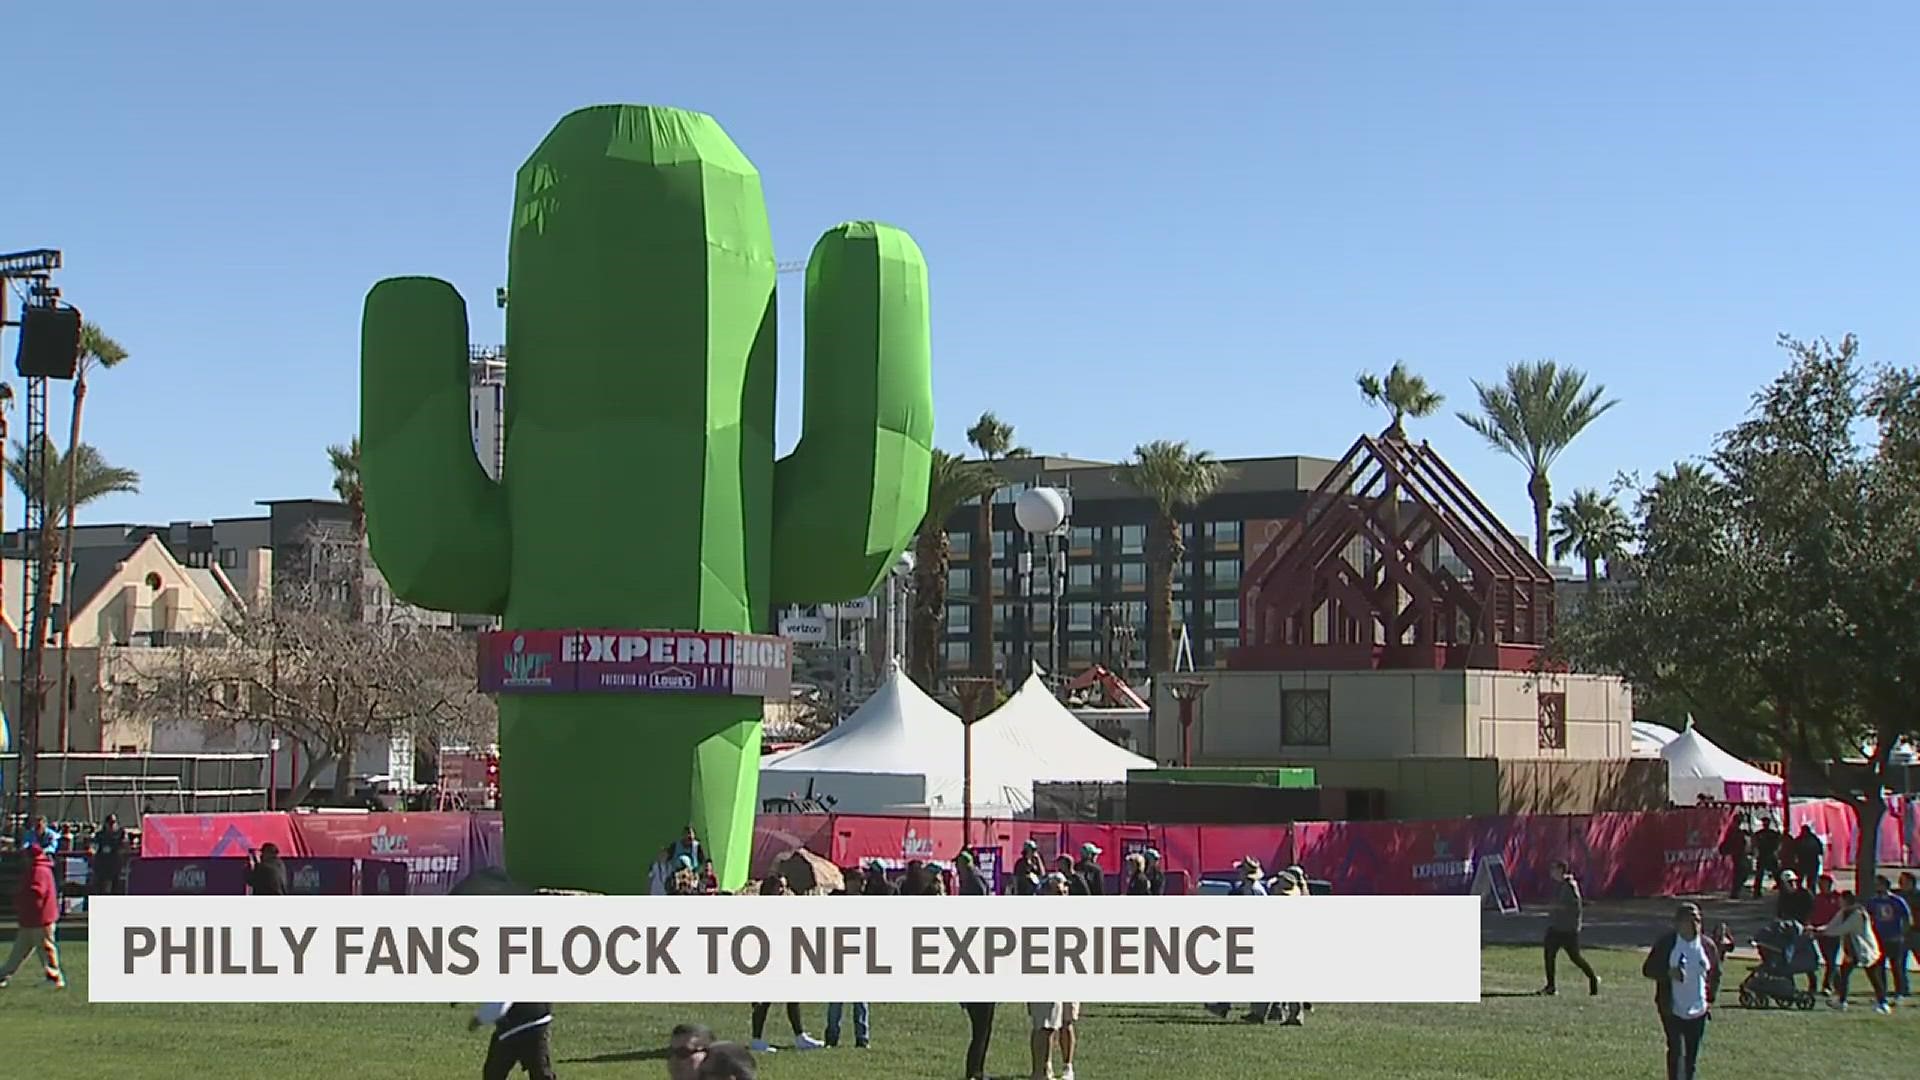 Fans in Arizona are gearing up for the Super Bowl, and enjoying the NFL Experience in Phoenix.